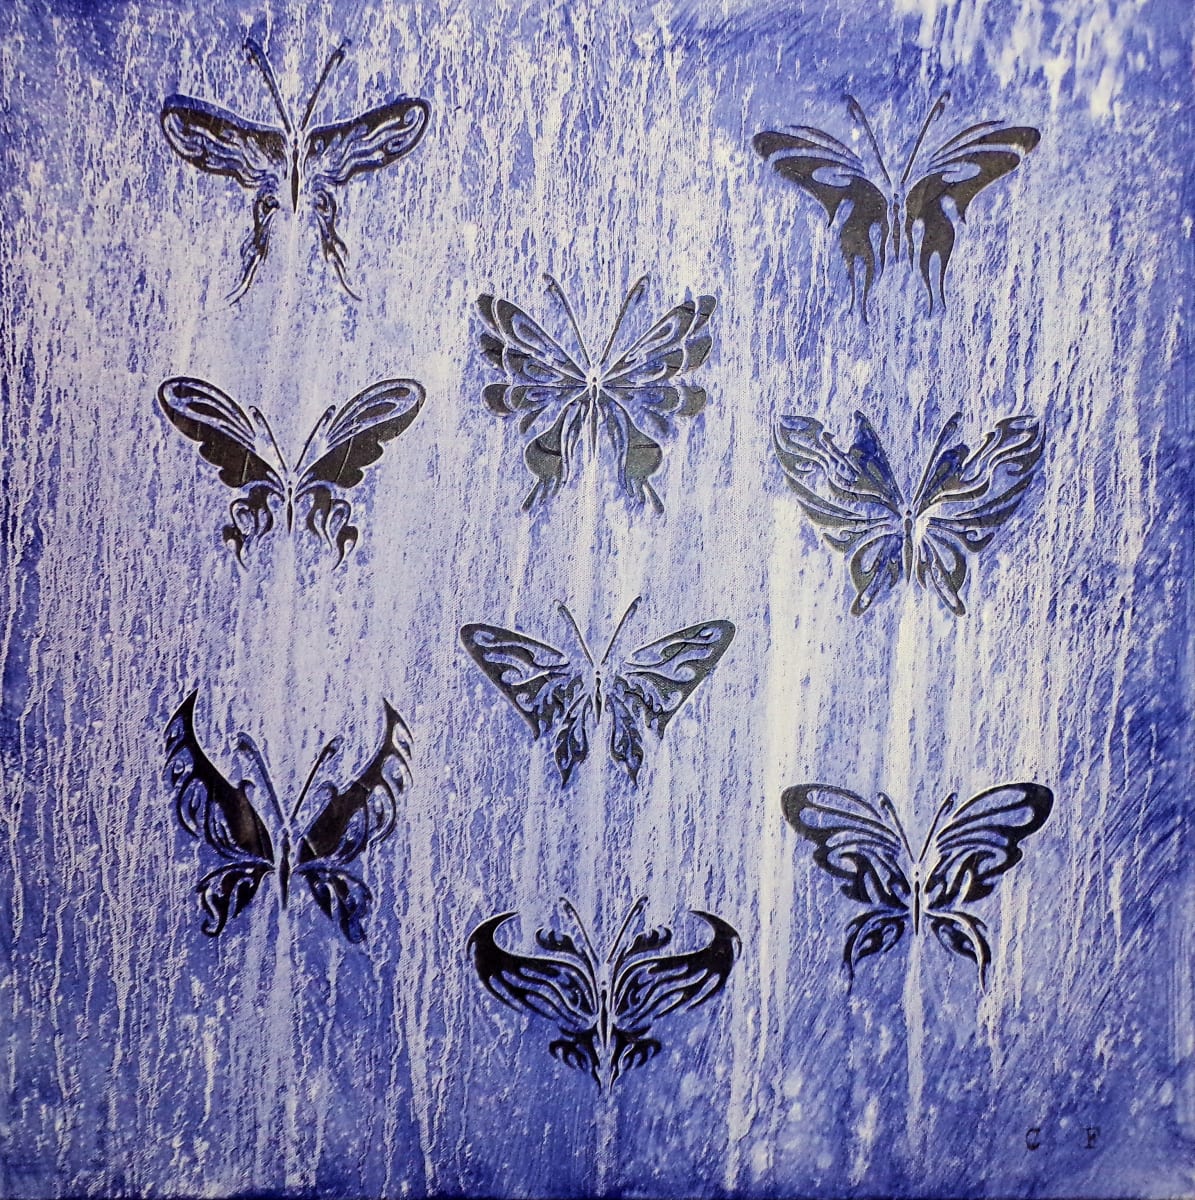 Butterfly Collection by Cynthia Fletcher  Image: Butterfly Collection